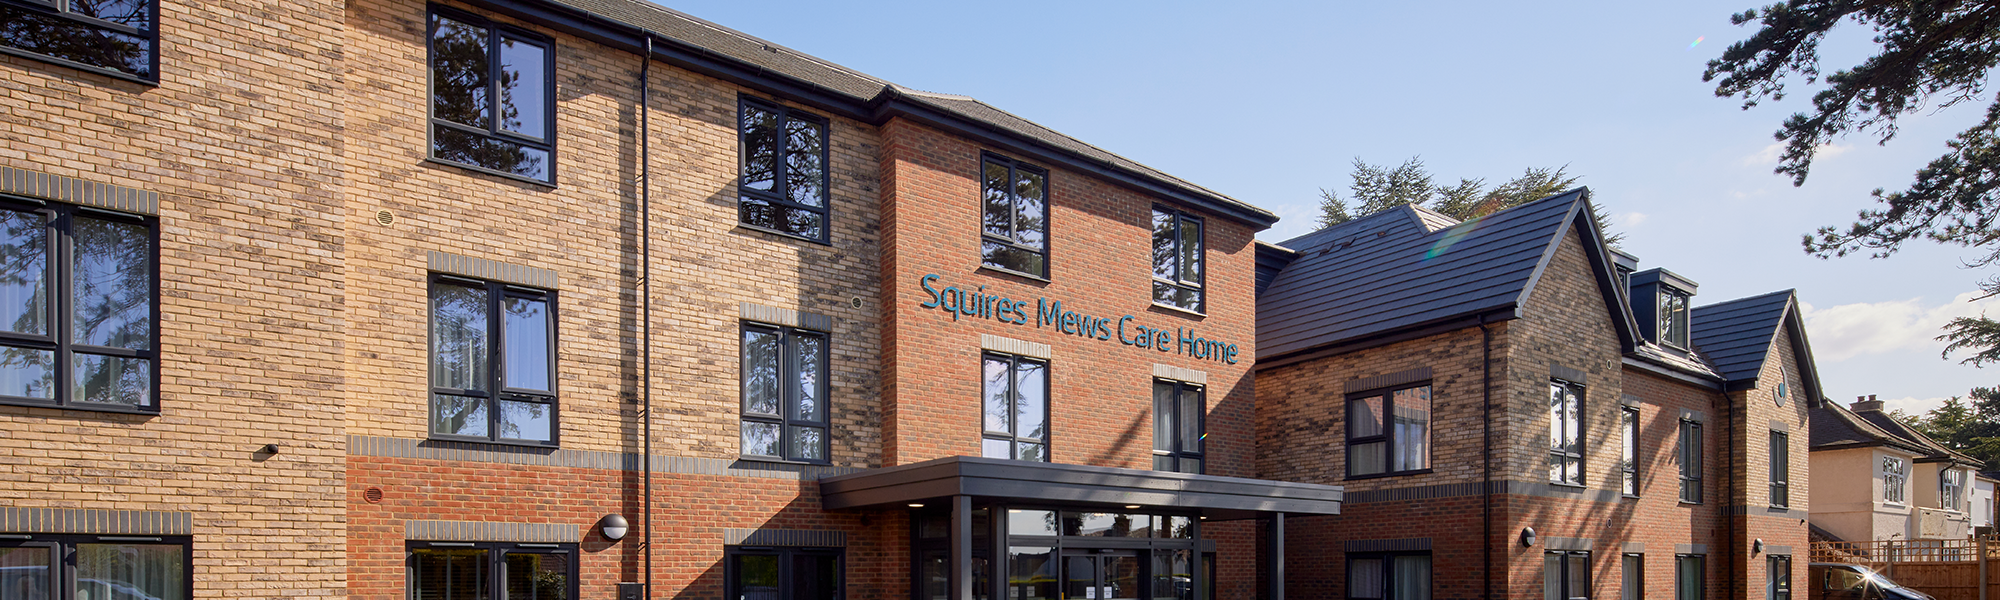 Squires Mews Luxury Care Provision Banner Image